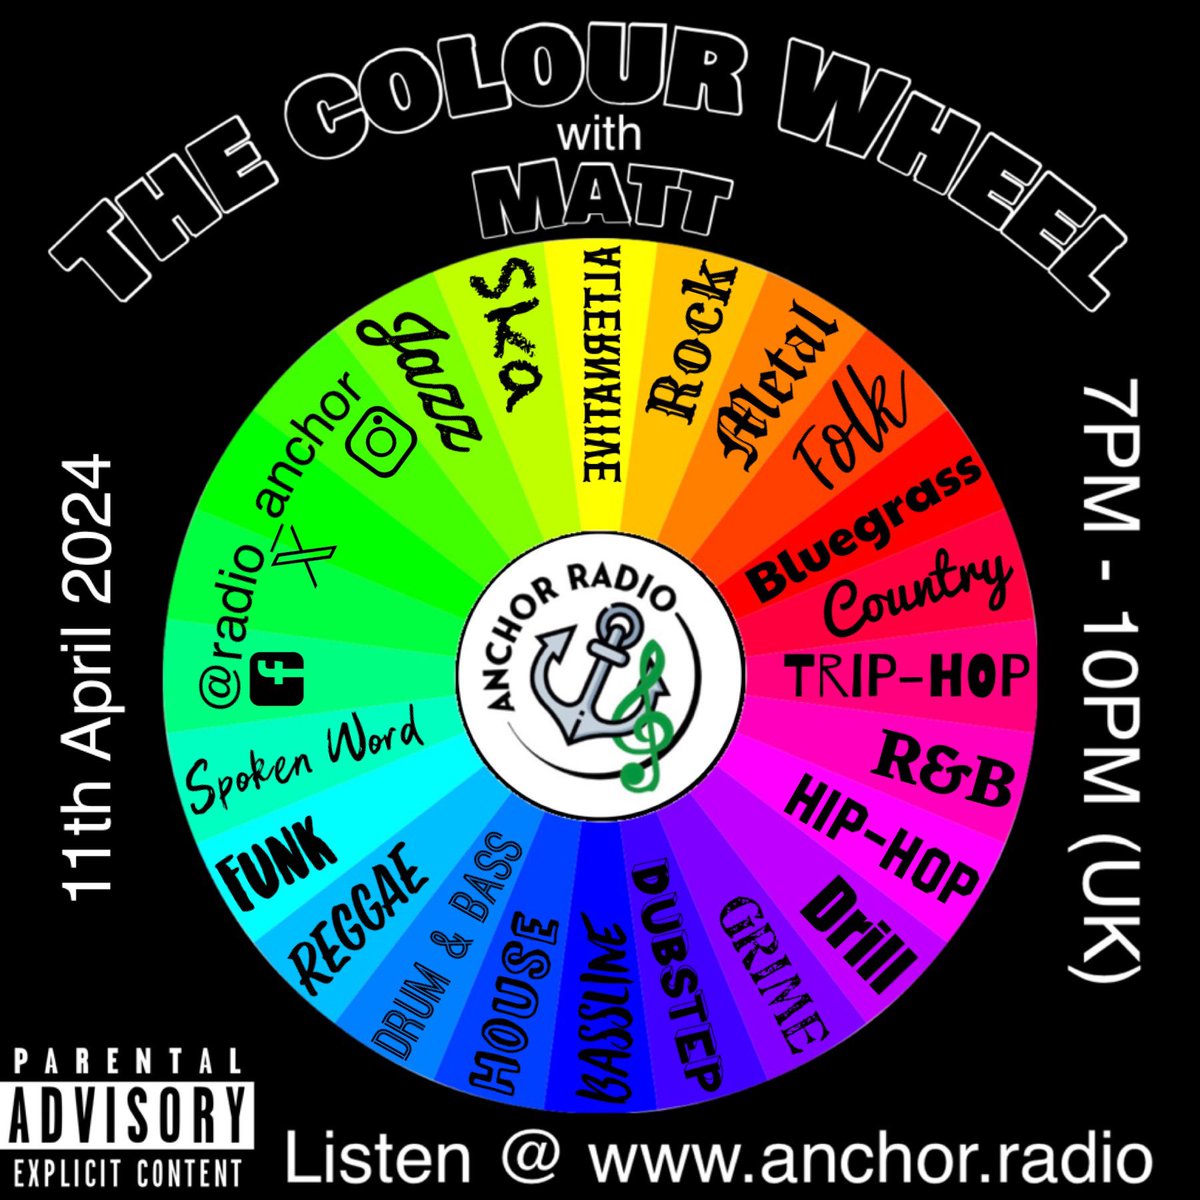 Did something “Eclectic music”? That’s what’s coming your way from 7PM (UK) with music for all the taste buds! Listen @ anchor.radio